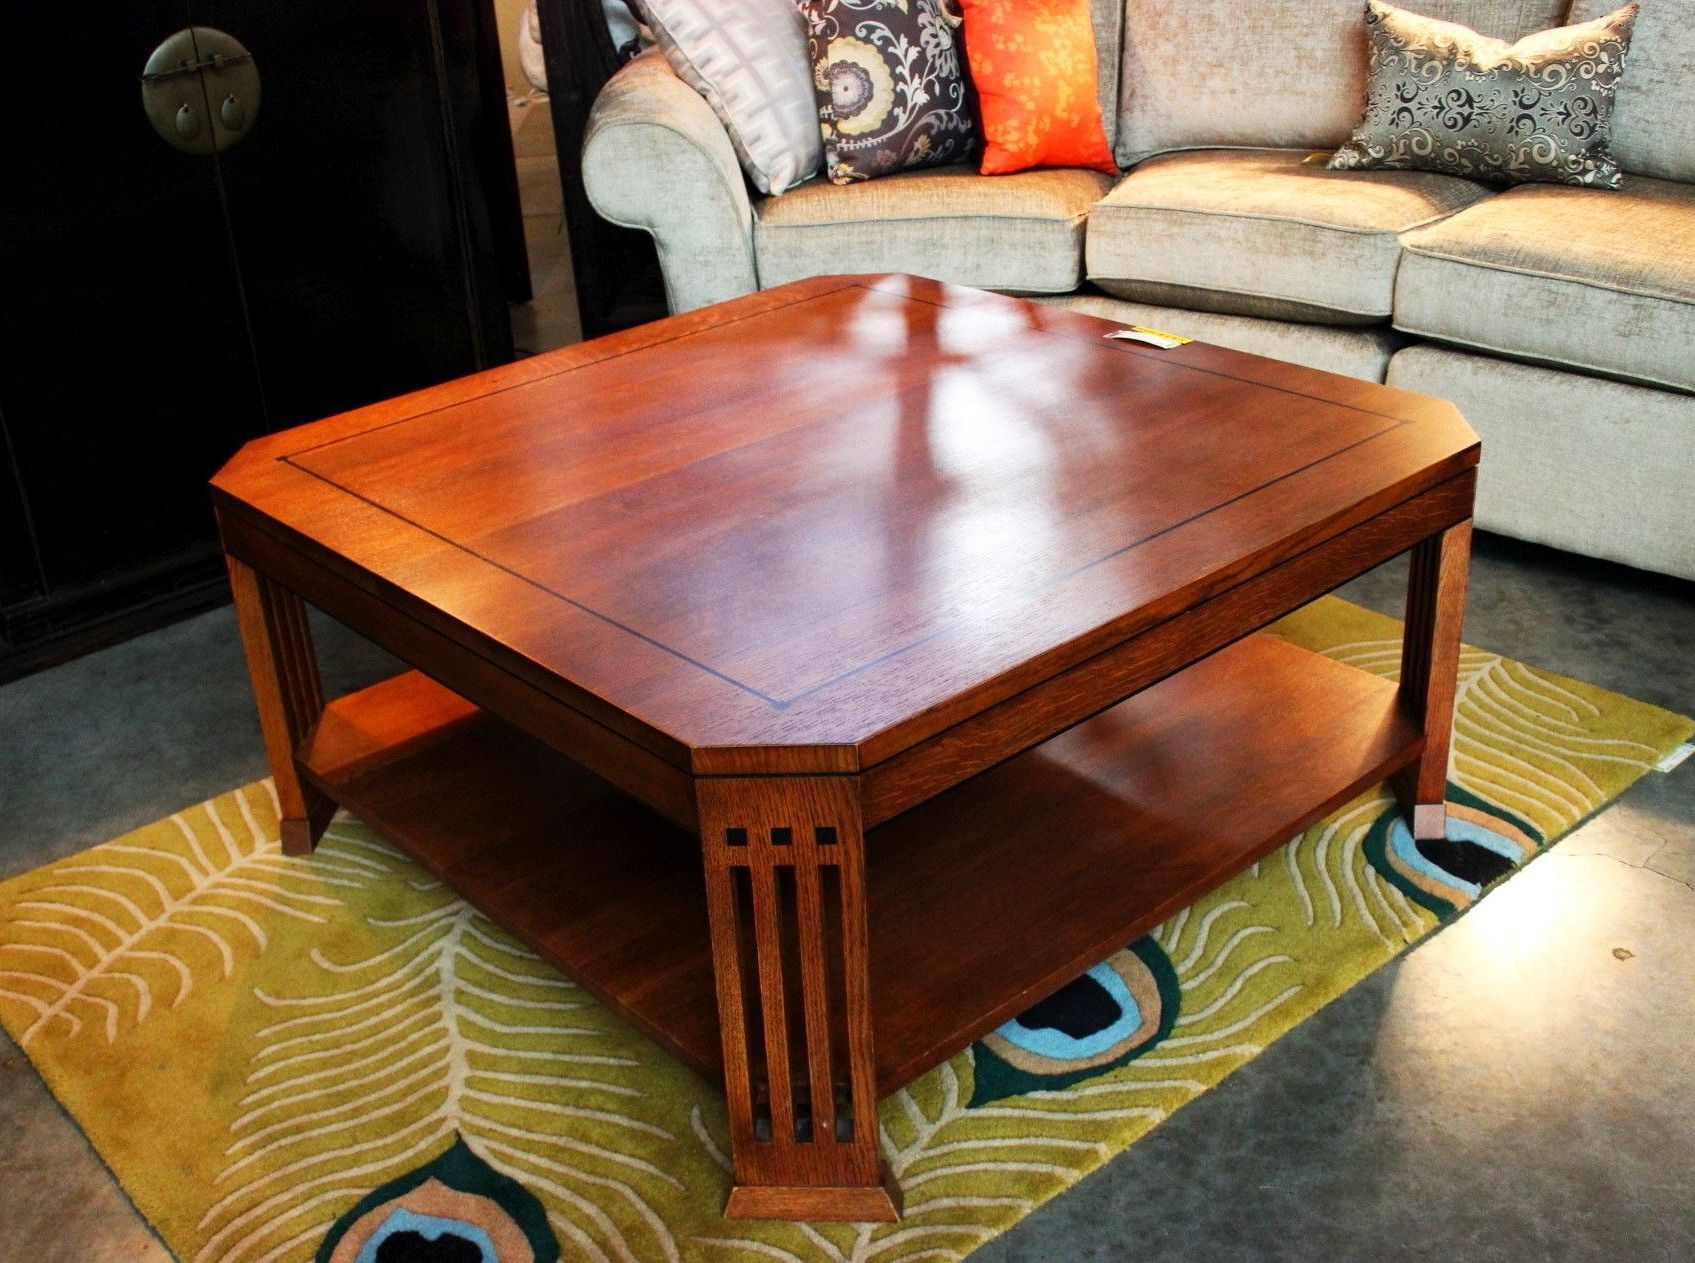 Stickley Mission Oak Coffee Table (sold) – Consignment Regarding Favorite Metal And Mission Oak Coffee Tables (View 4 of 20)